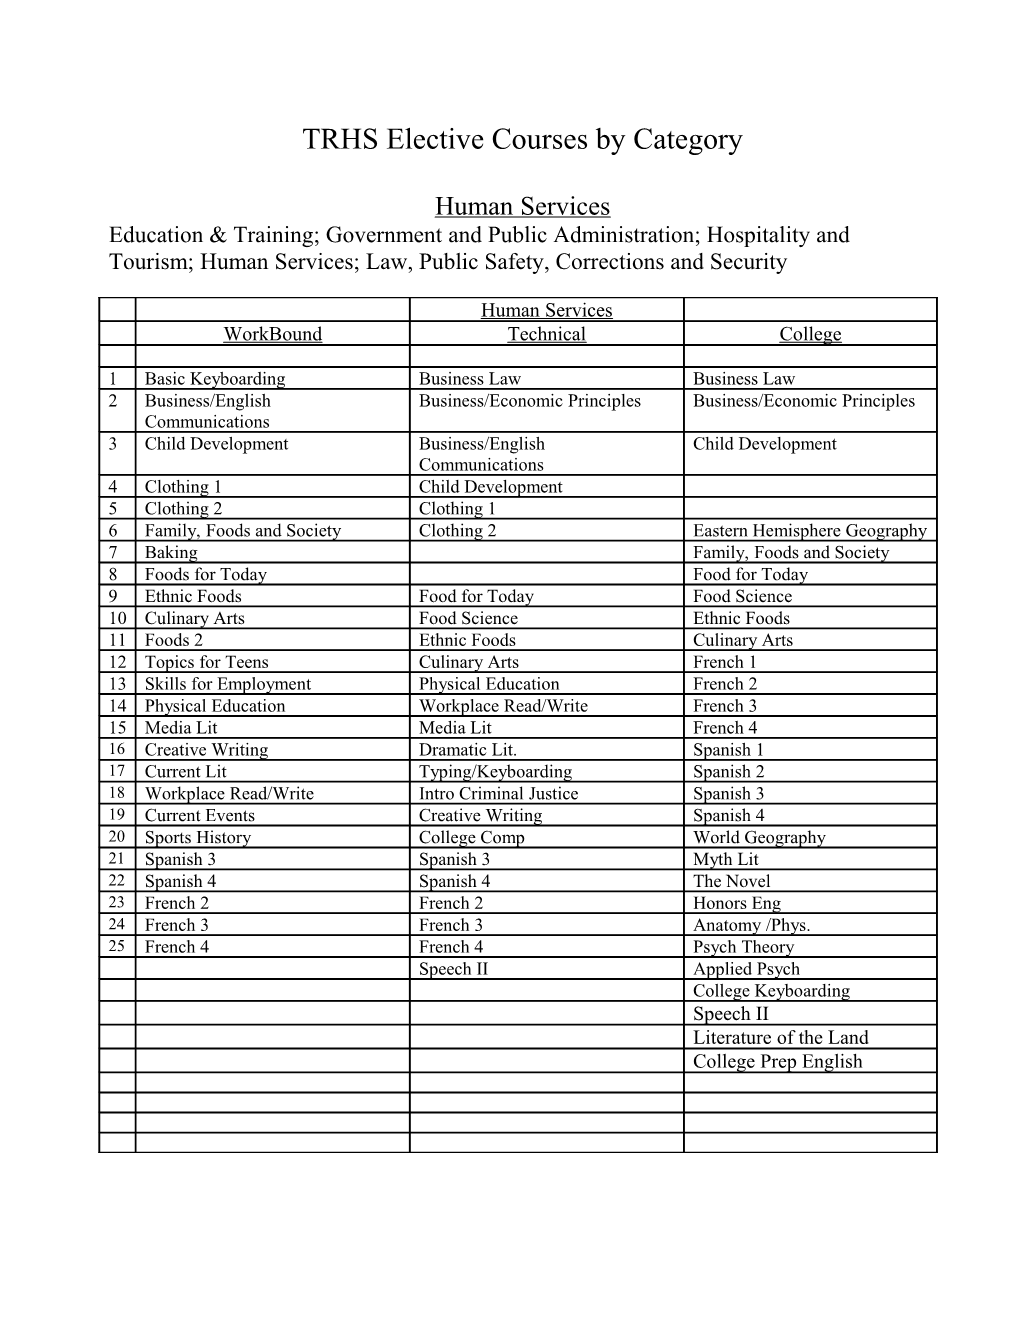 TRHS Elective Courses by Category